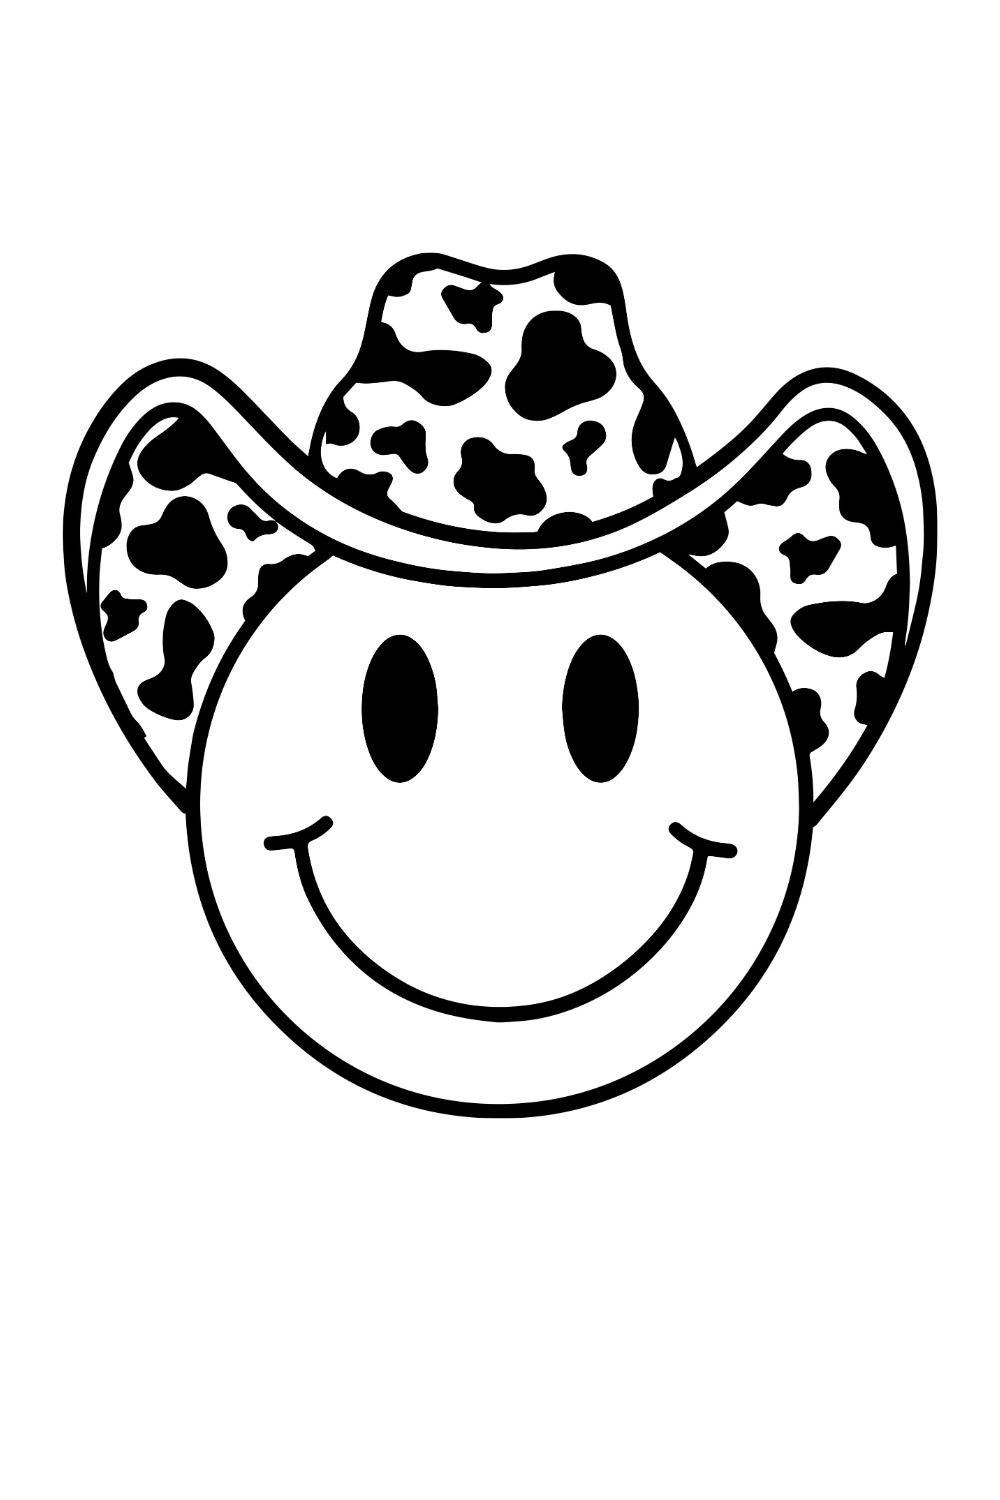 Smiley face cowboy hat svg happy face smiley face wallpaper cowboy hat drawing graphic design fonts smiley